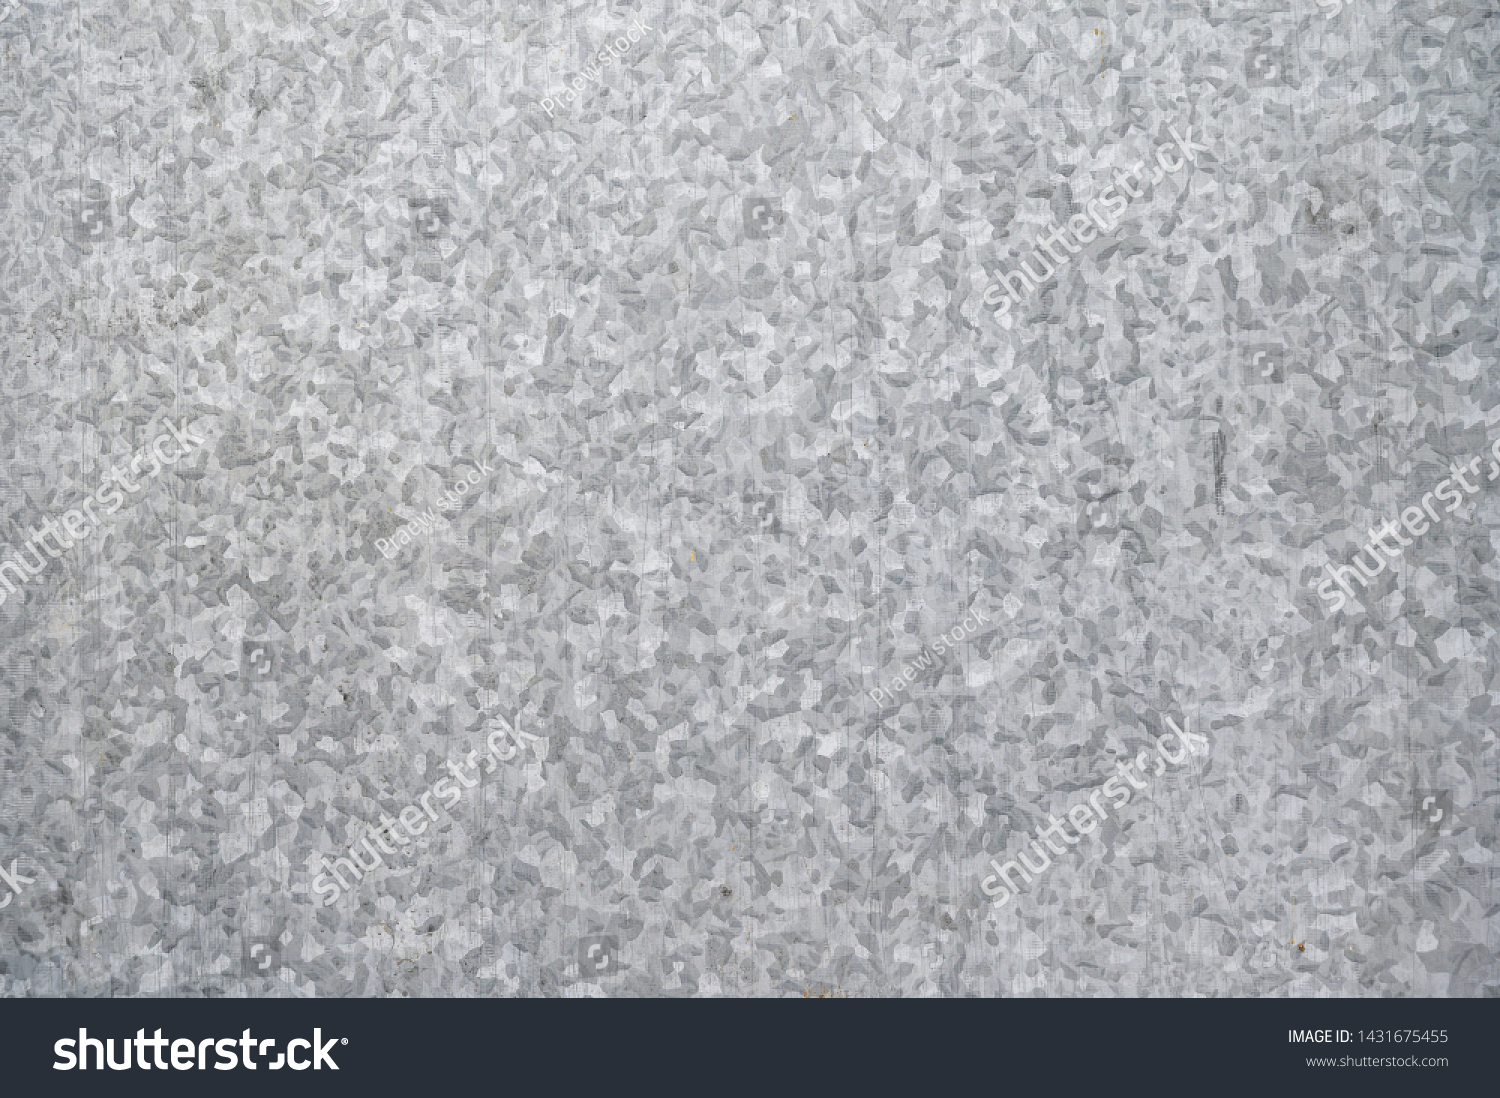 Galvanized steel plate for background,texture of galvanized iron roof plate backdrop pattern. #1431675455